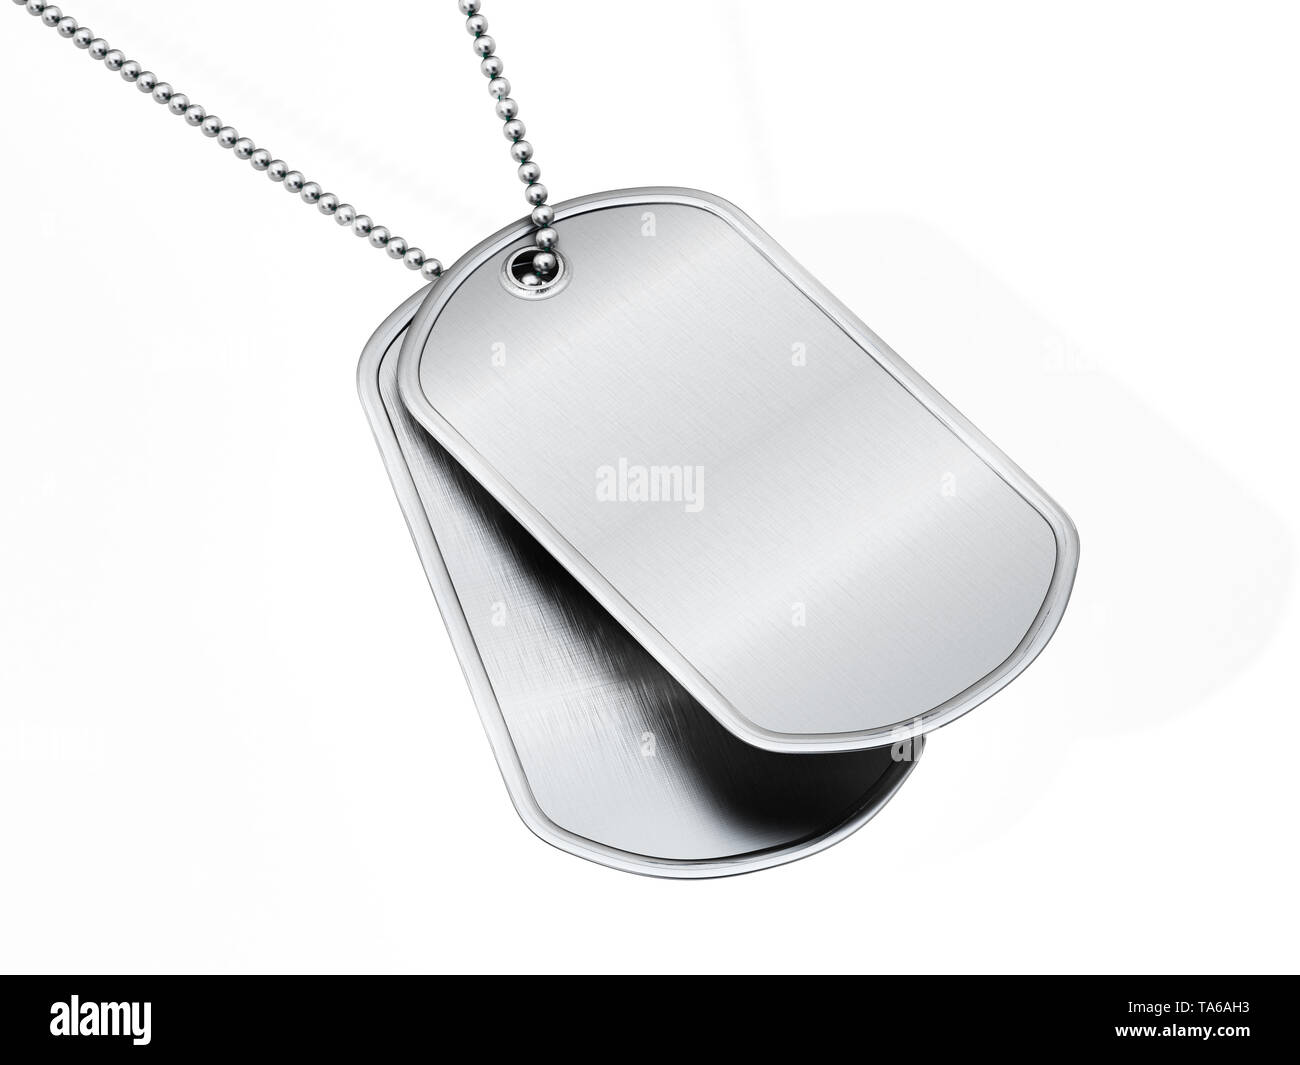 USA Military Army Style Dog Tags -  Norway